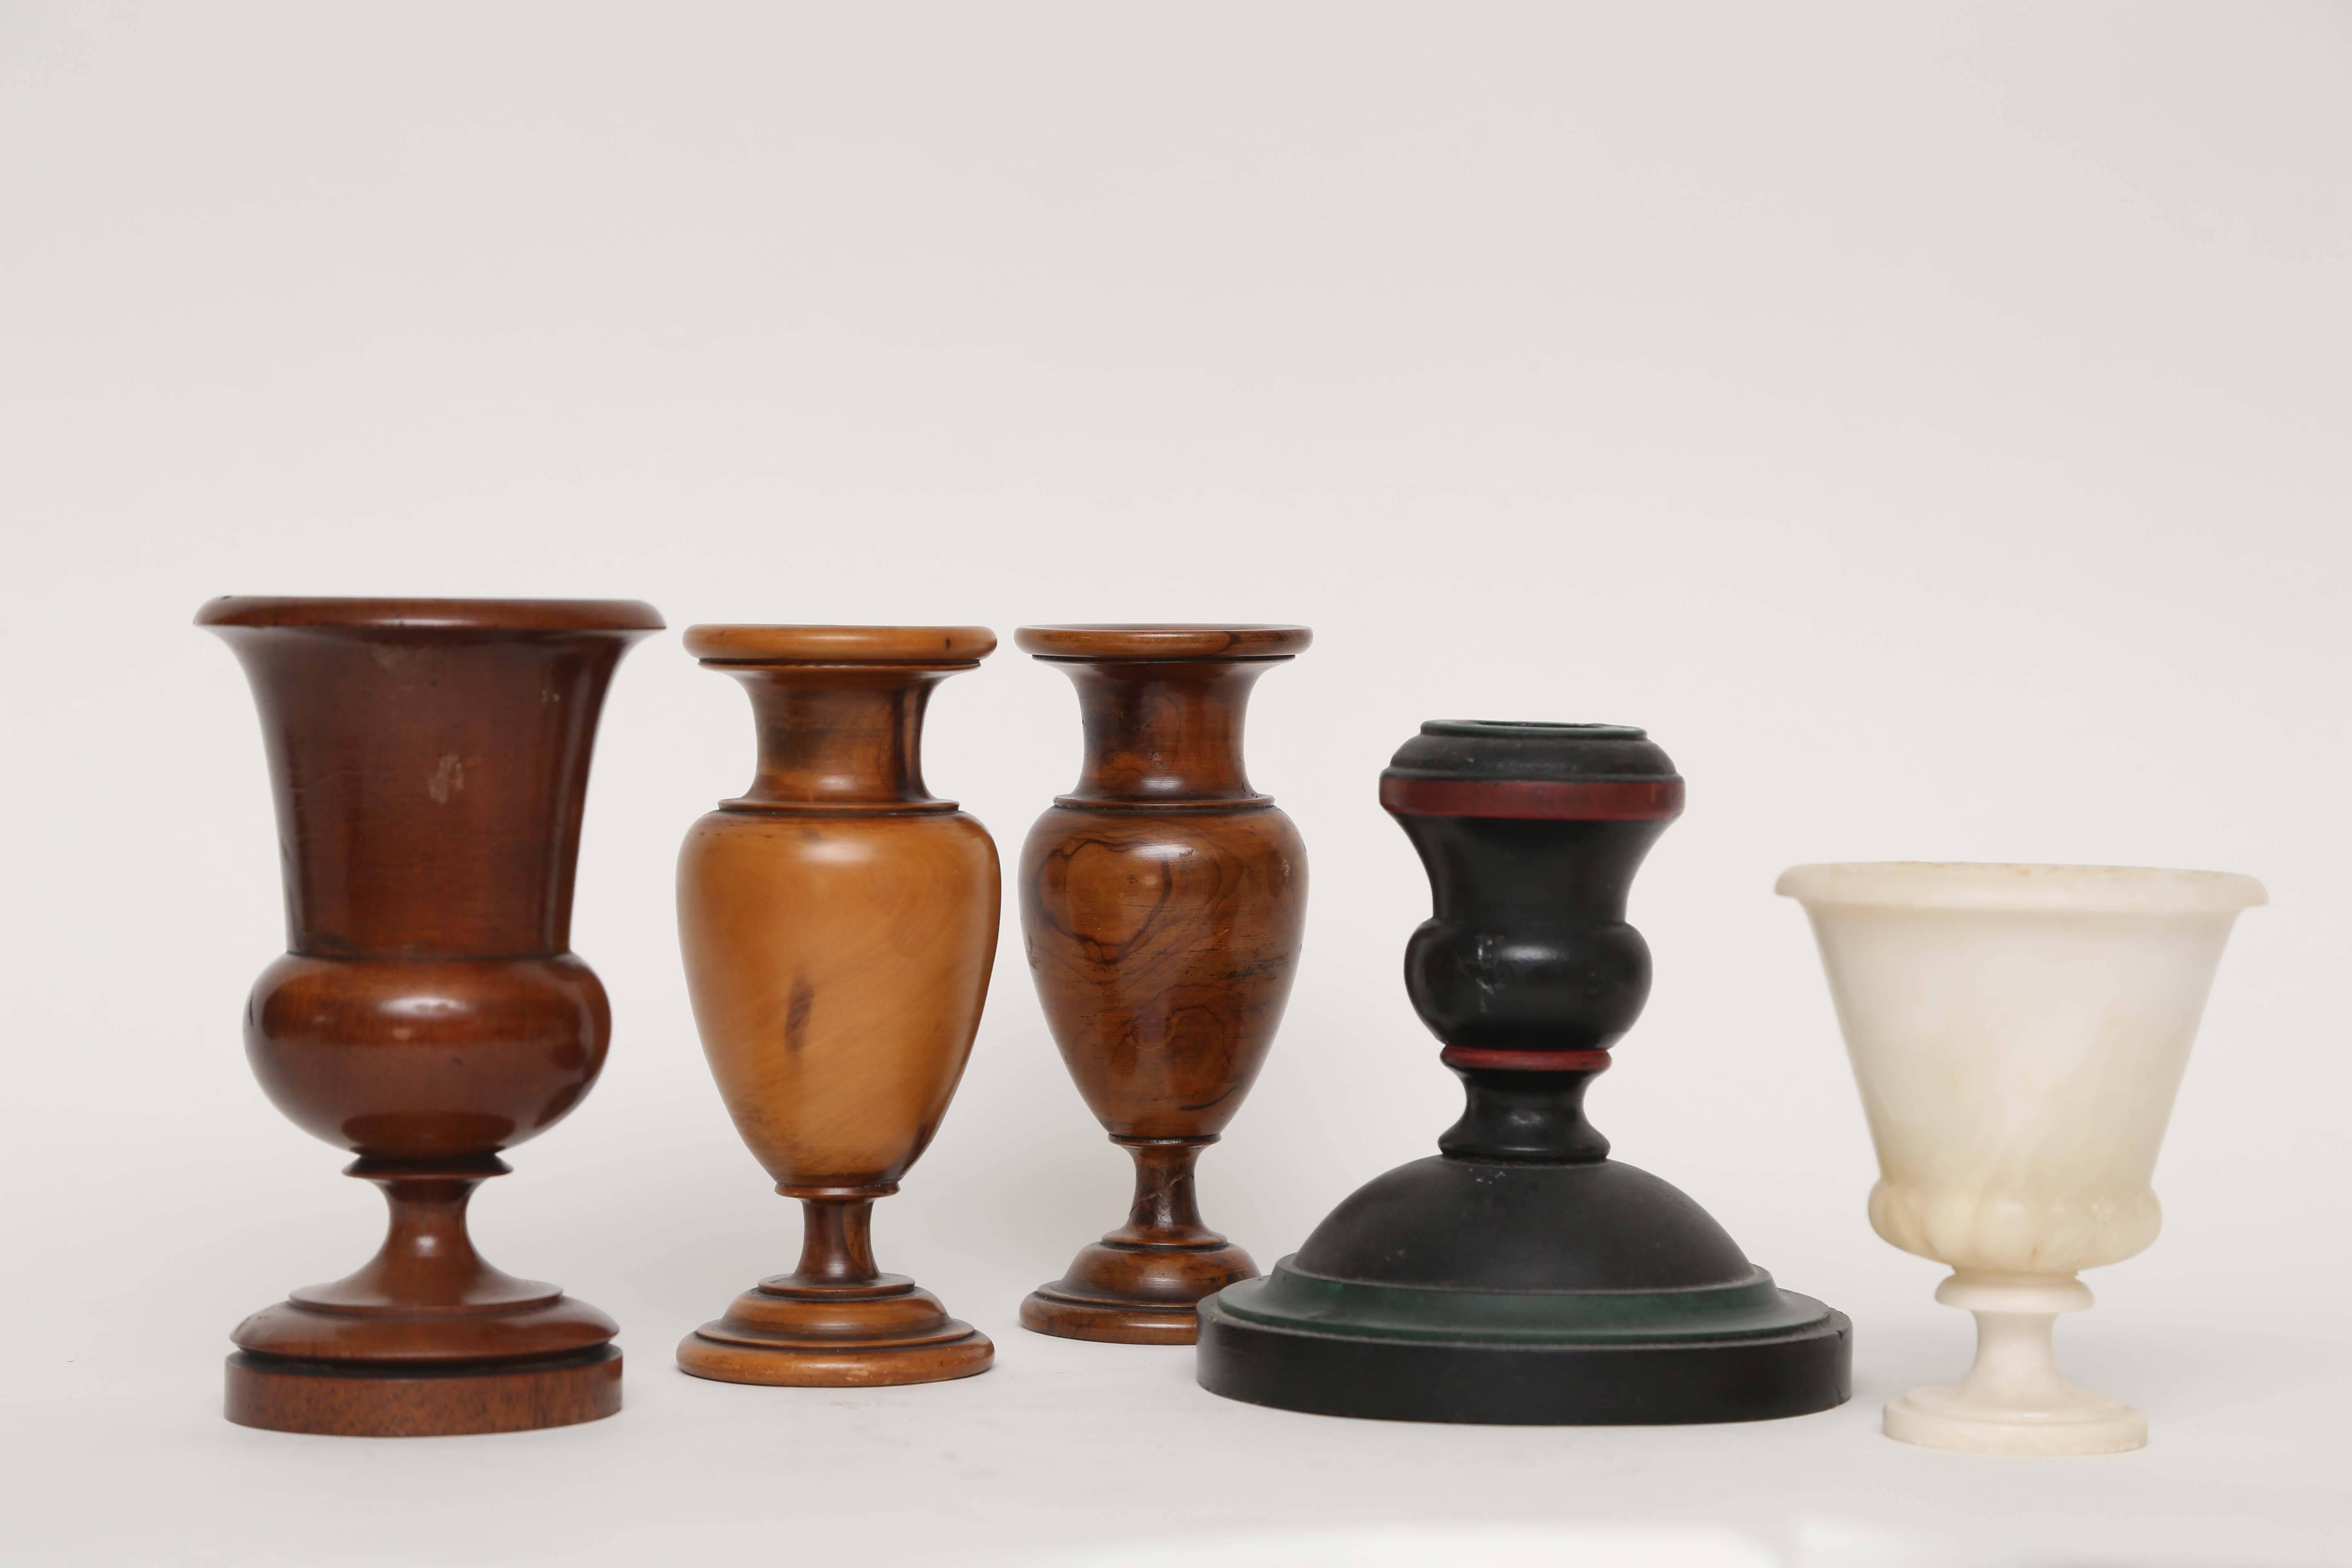 A tabletop collection of turned wood treens, a wood candlestick and an alabaster campana style cup.